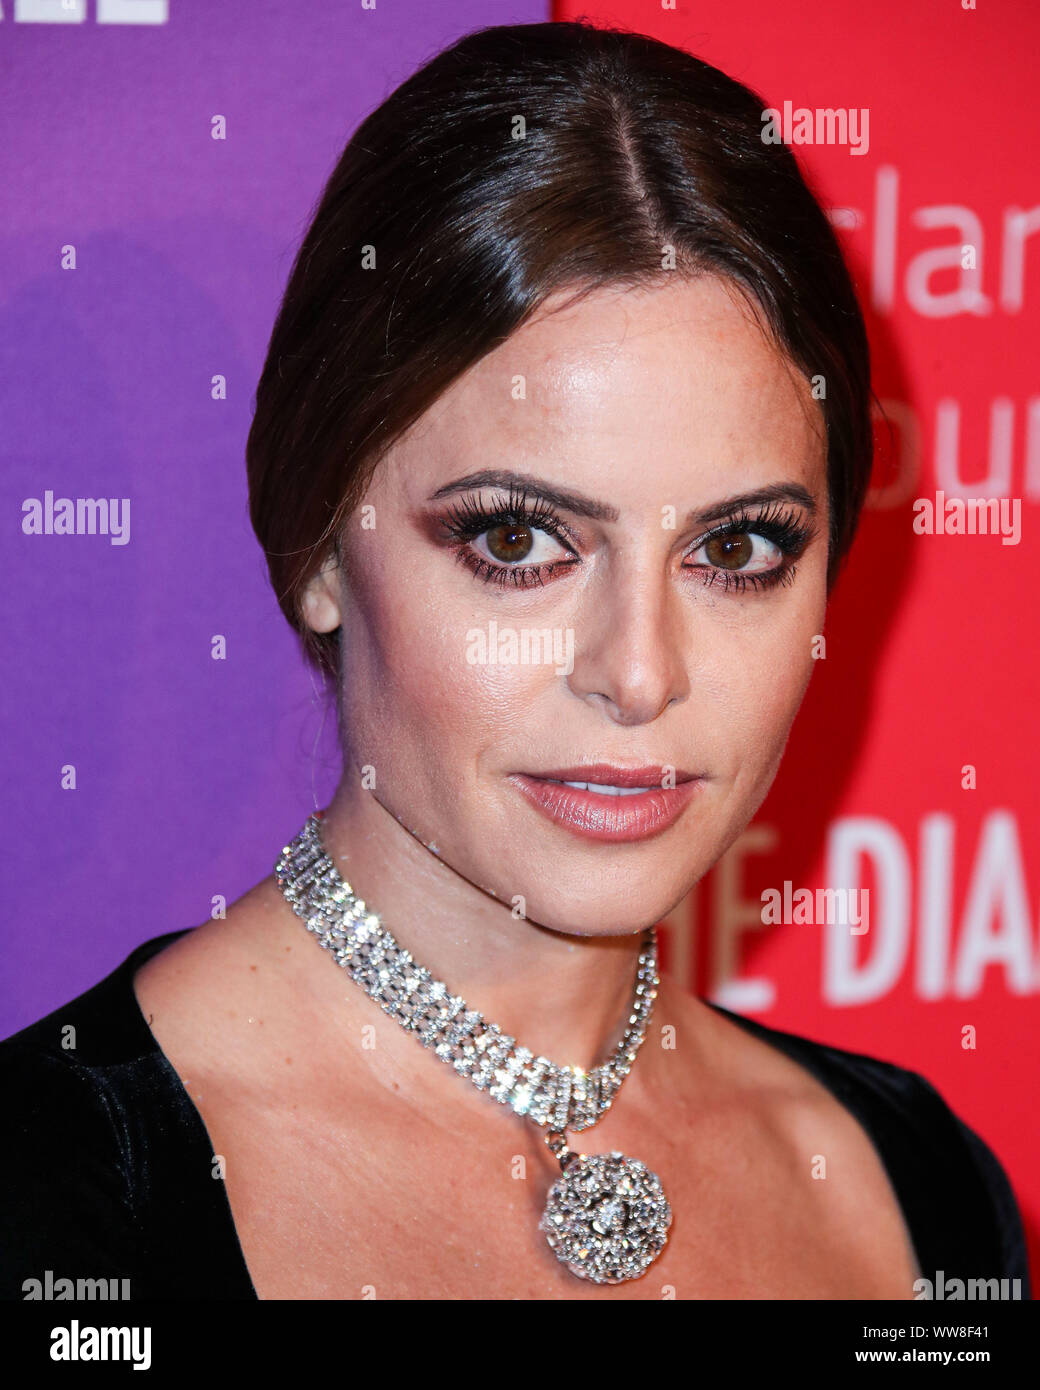 New York City, United States. 12th Sep, 2019. MANHATTAN, NEW YORK CITY, NEW YORK, USA - SEPTEMBER 12: Sophia Amoruso arrives at Rihanna's 5th Annual Diamond Ball Benefitting The Clara Lionel Foundation held at Cipriani Wall Street on September 12, 2019 in Manhattan, New York City, New York, United States. (Photo by Xavier Collin/Image Press Agency) Credit: Image Press Agency/Alamy Live News Stock Photo